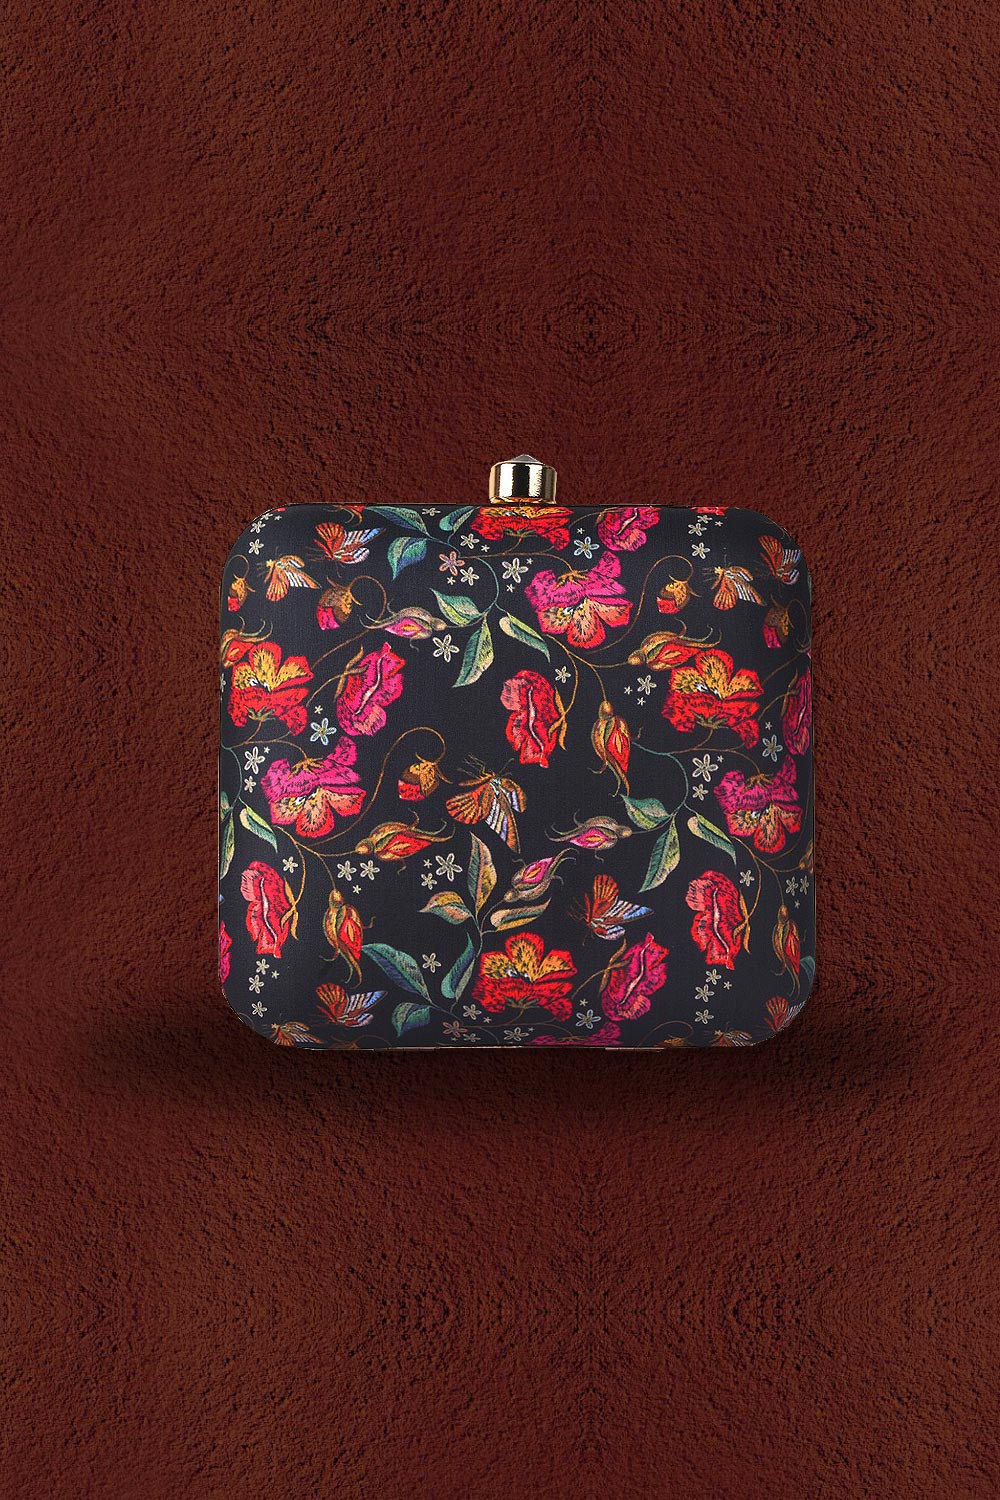 Multicolored Floral Printed Clutch